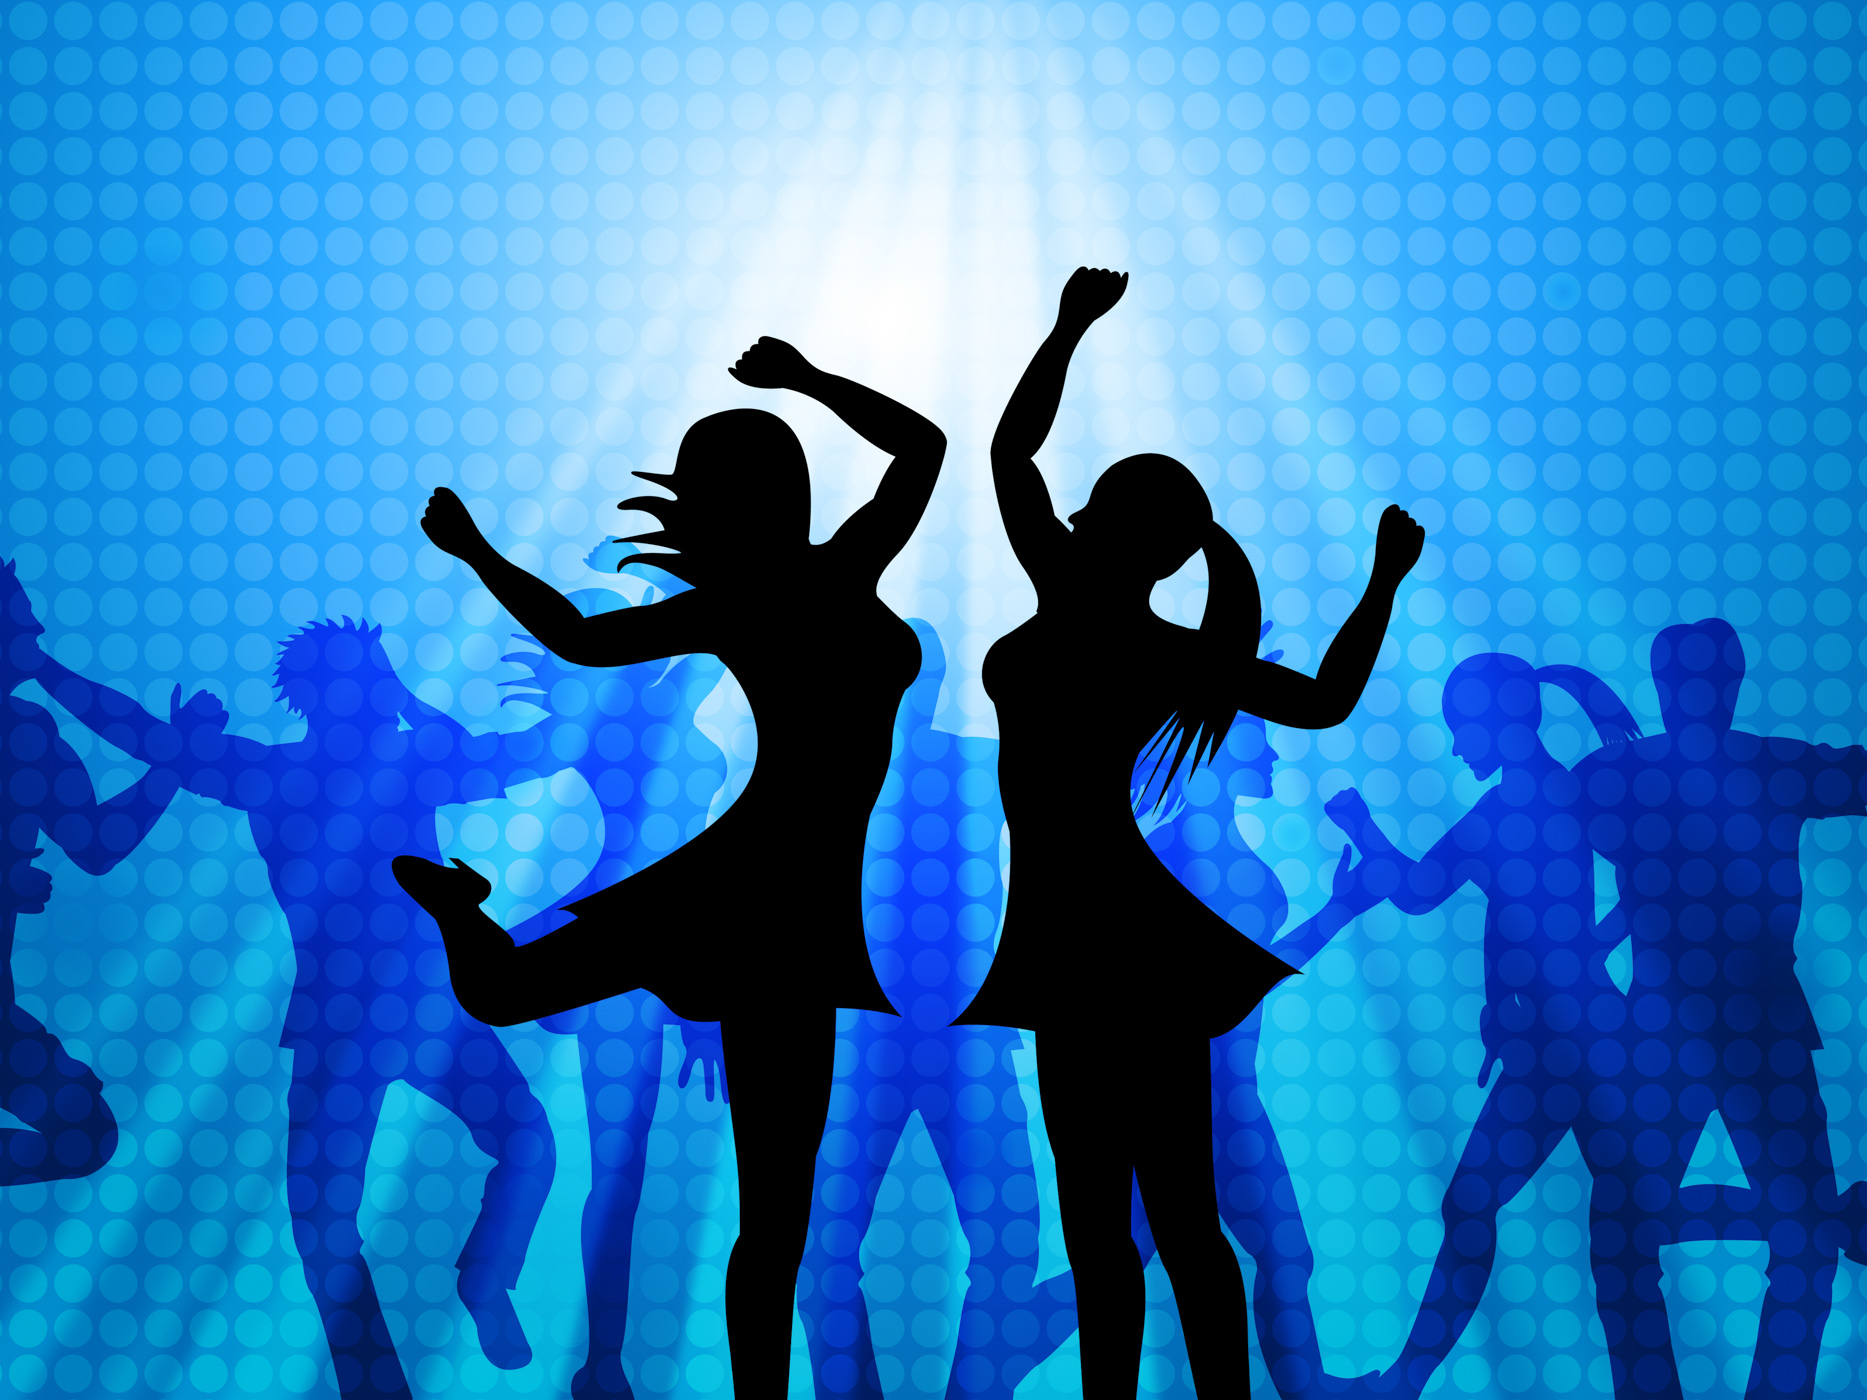 Women dancing represents disco music and adults photo